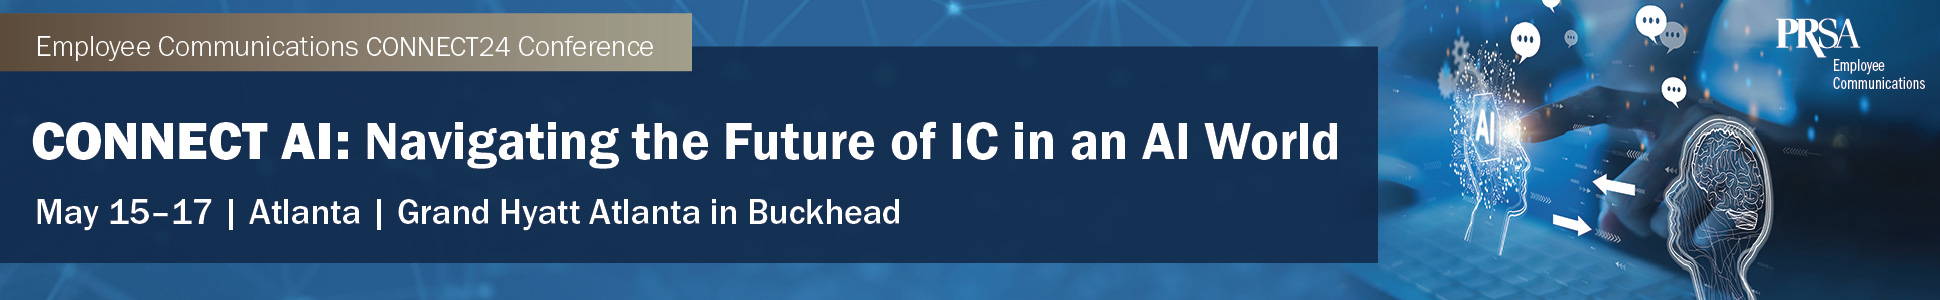 CONNECT AI: Navigating the Future of IC in an AI World